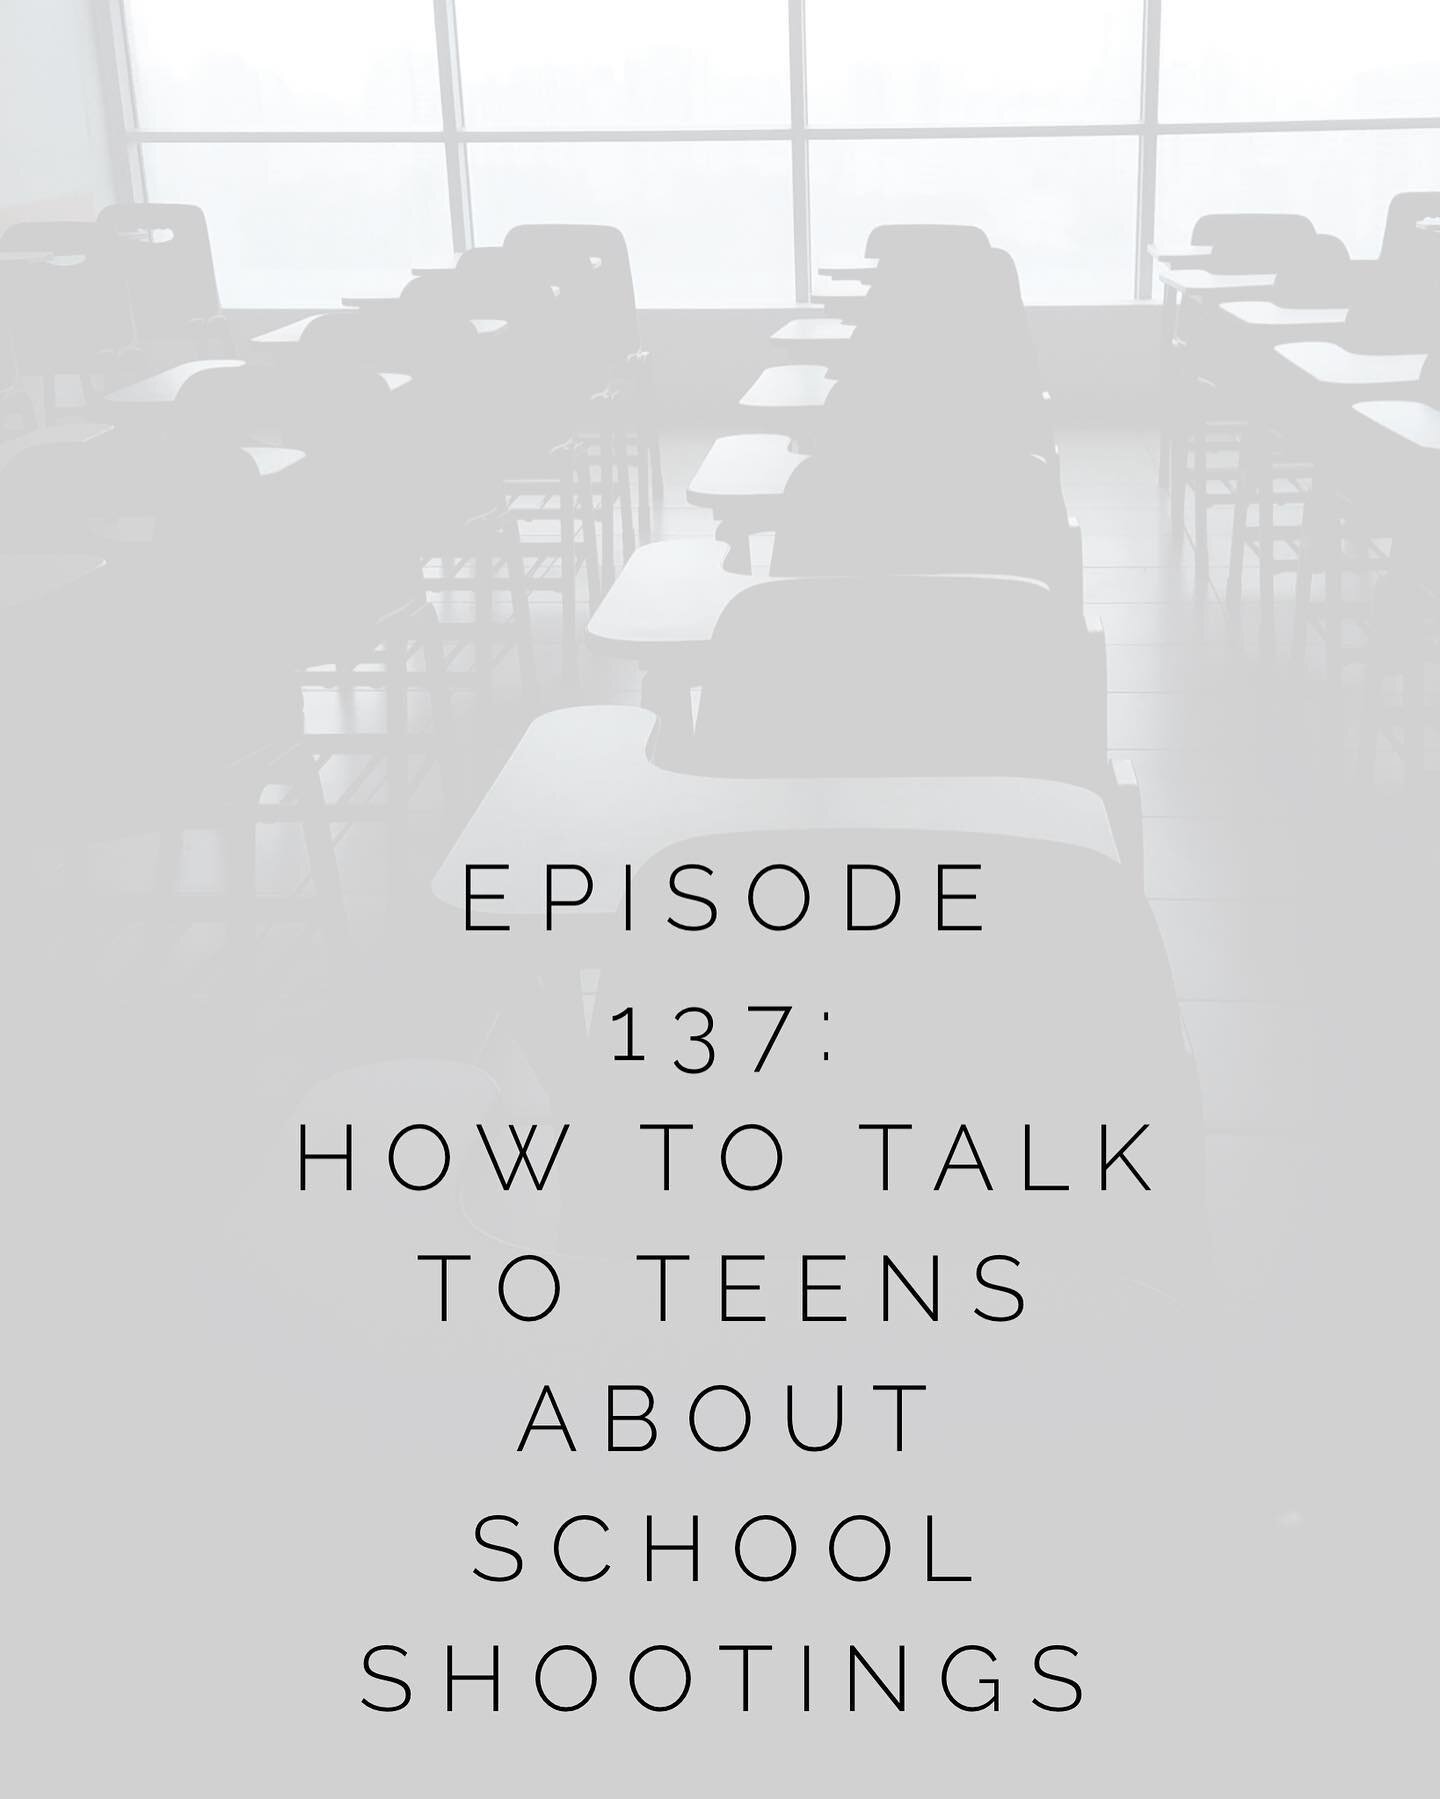 School shootings only add to parents' fears for their child's safety and well-being. These fears make it hard for parents to know how to or even if they should talk to their kids about these events. As you might guess, Dr. Ken suggests there are impo